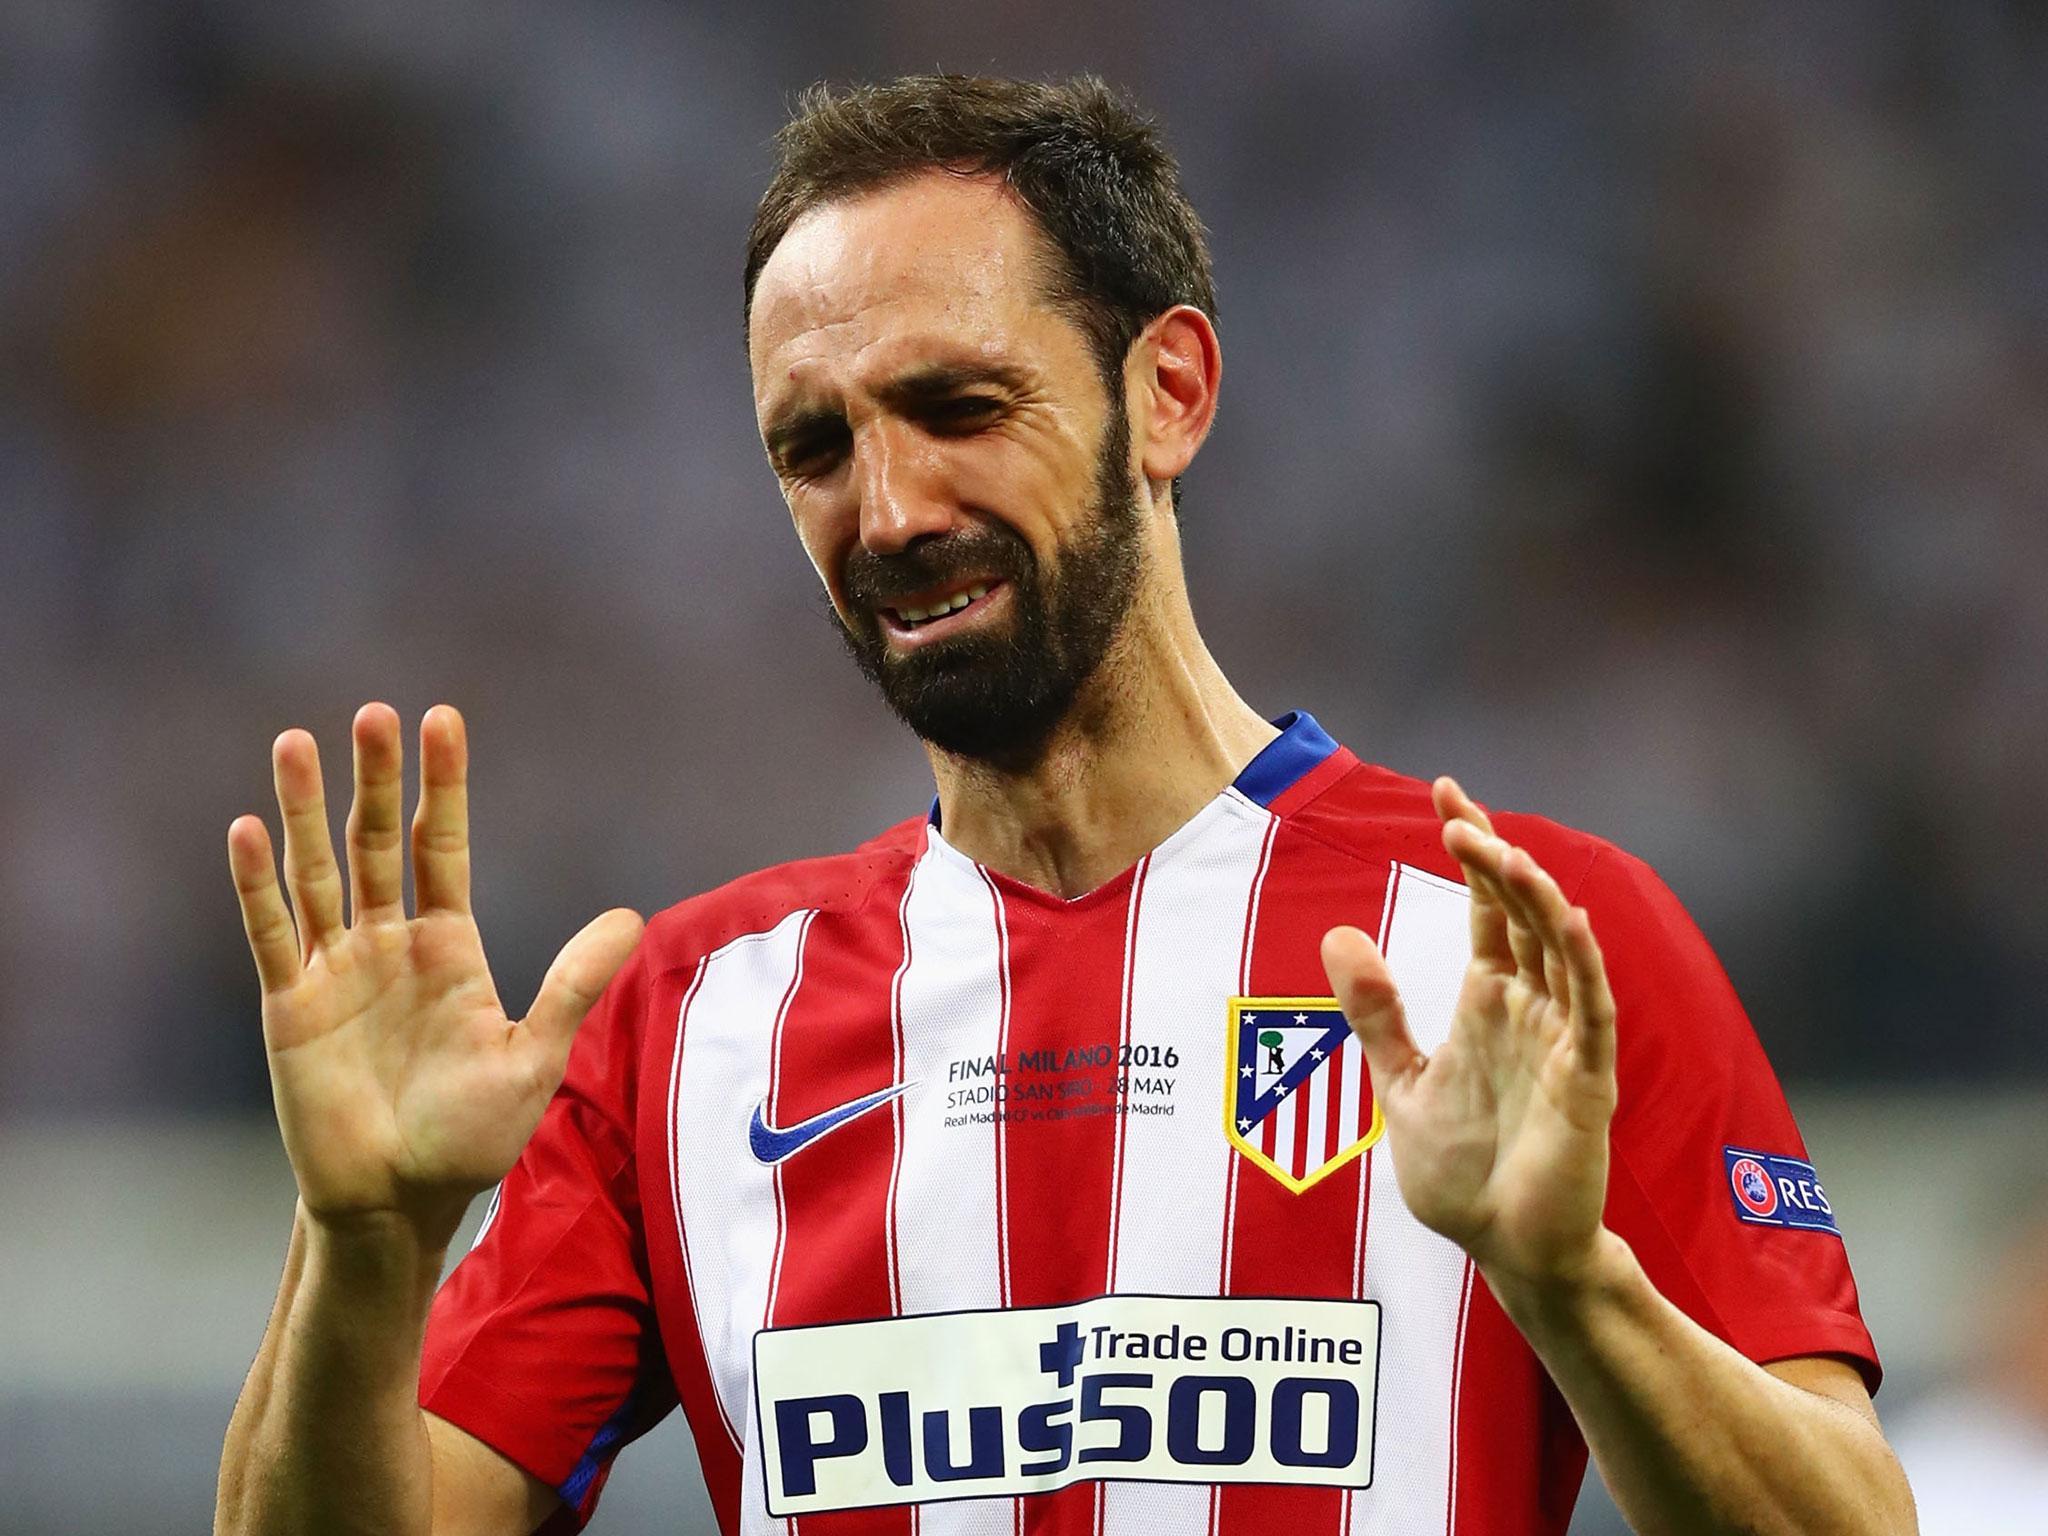 Atletico have years of wounds to heal when they face their old rivals once again